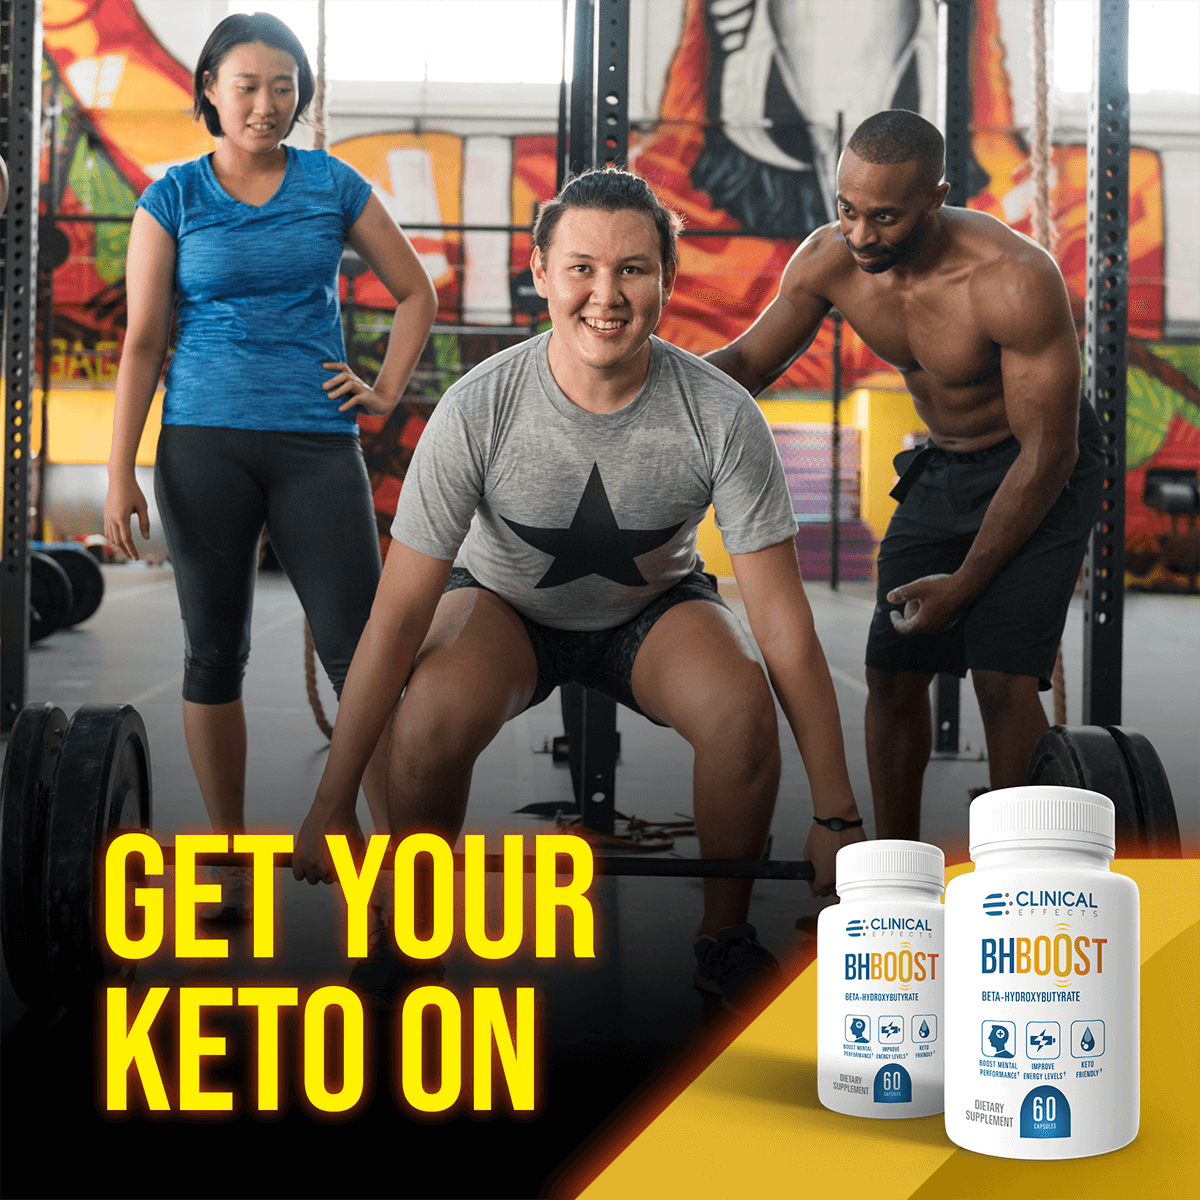 Get your keto on